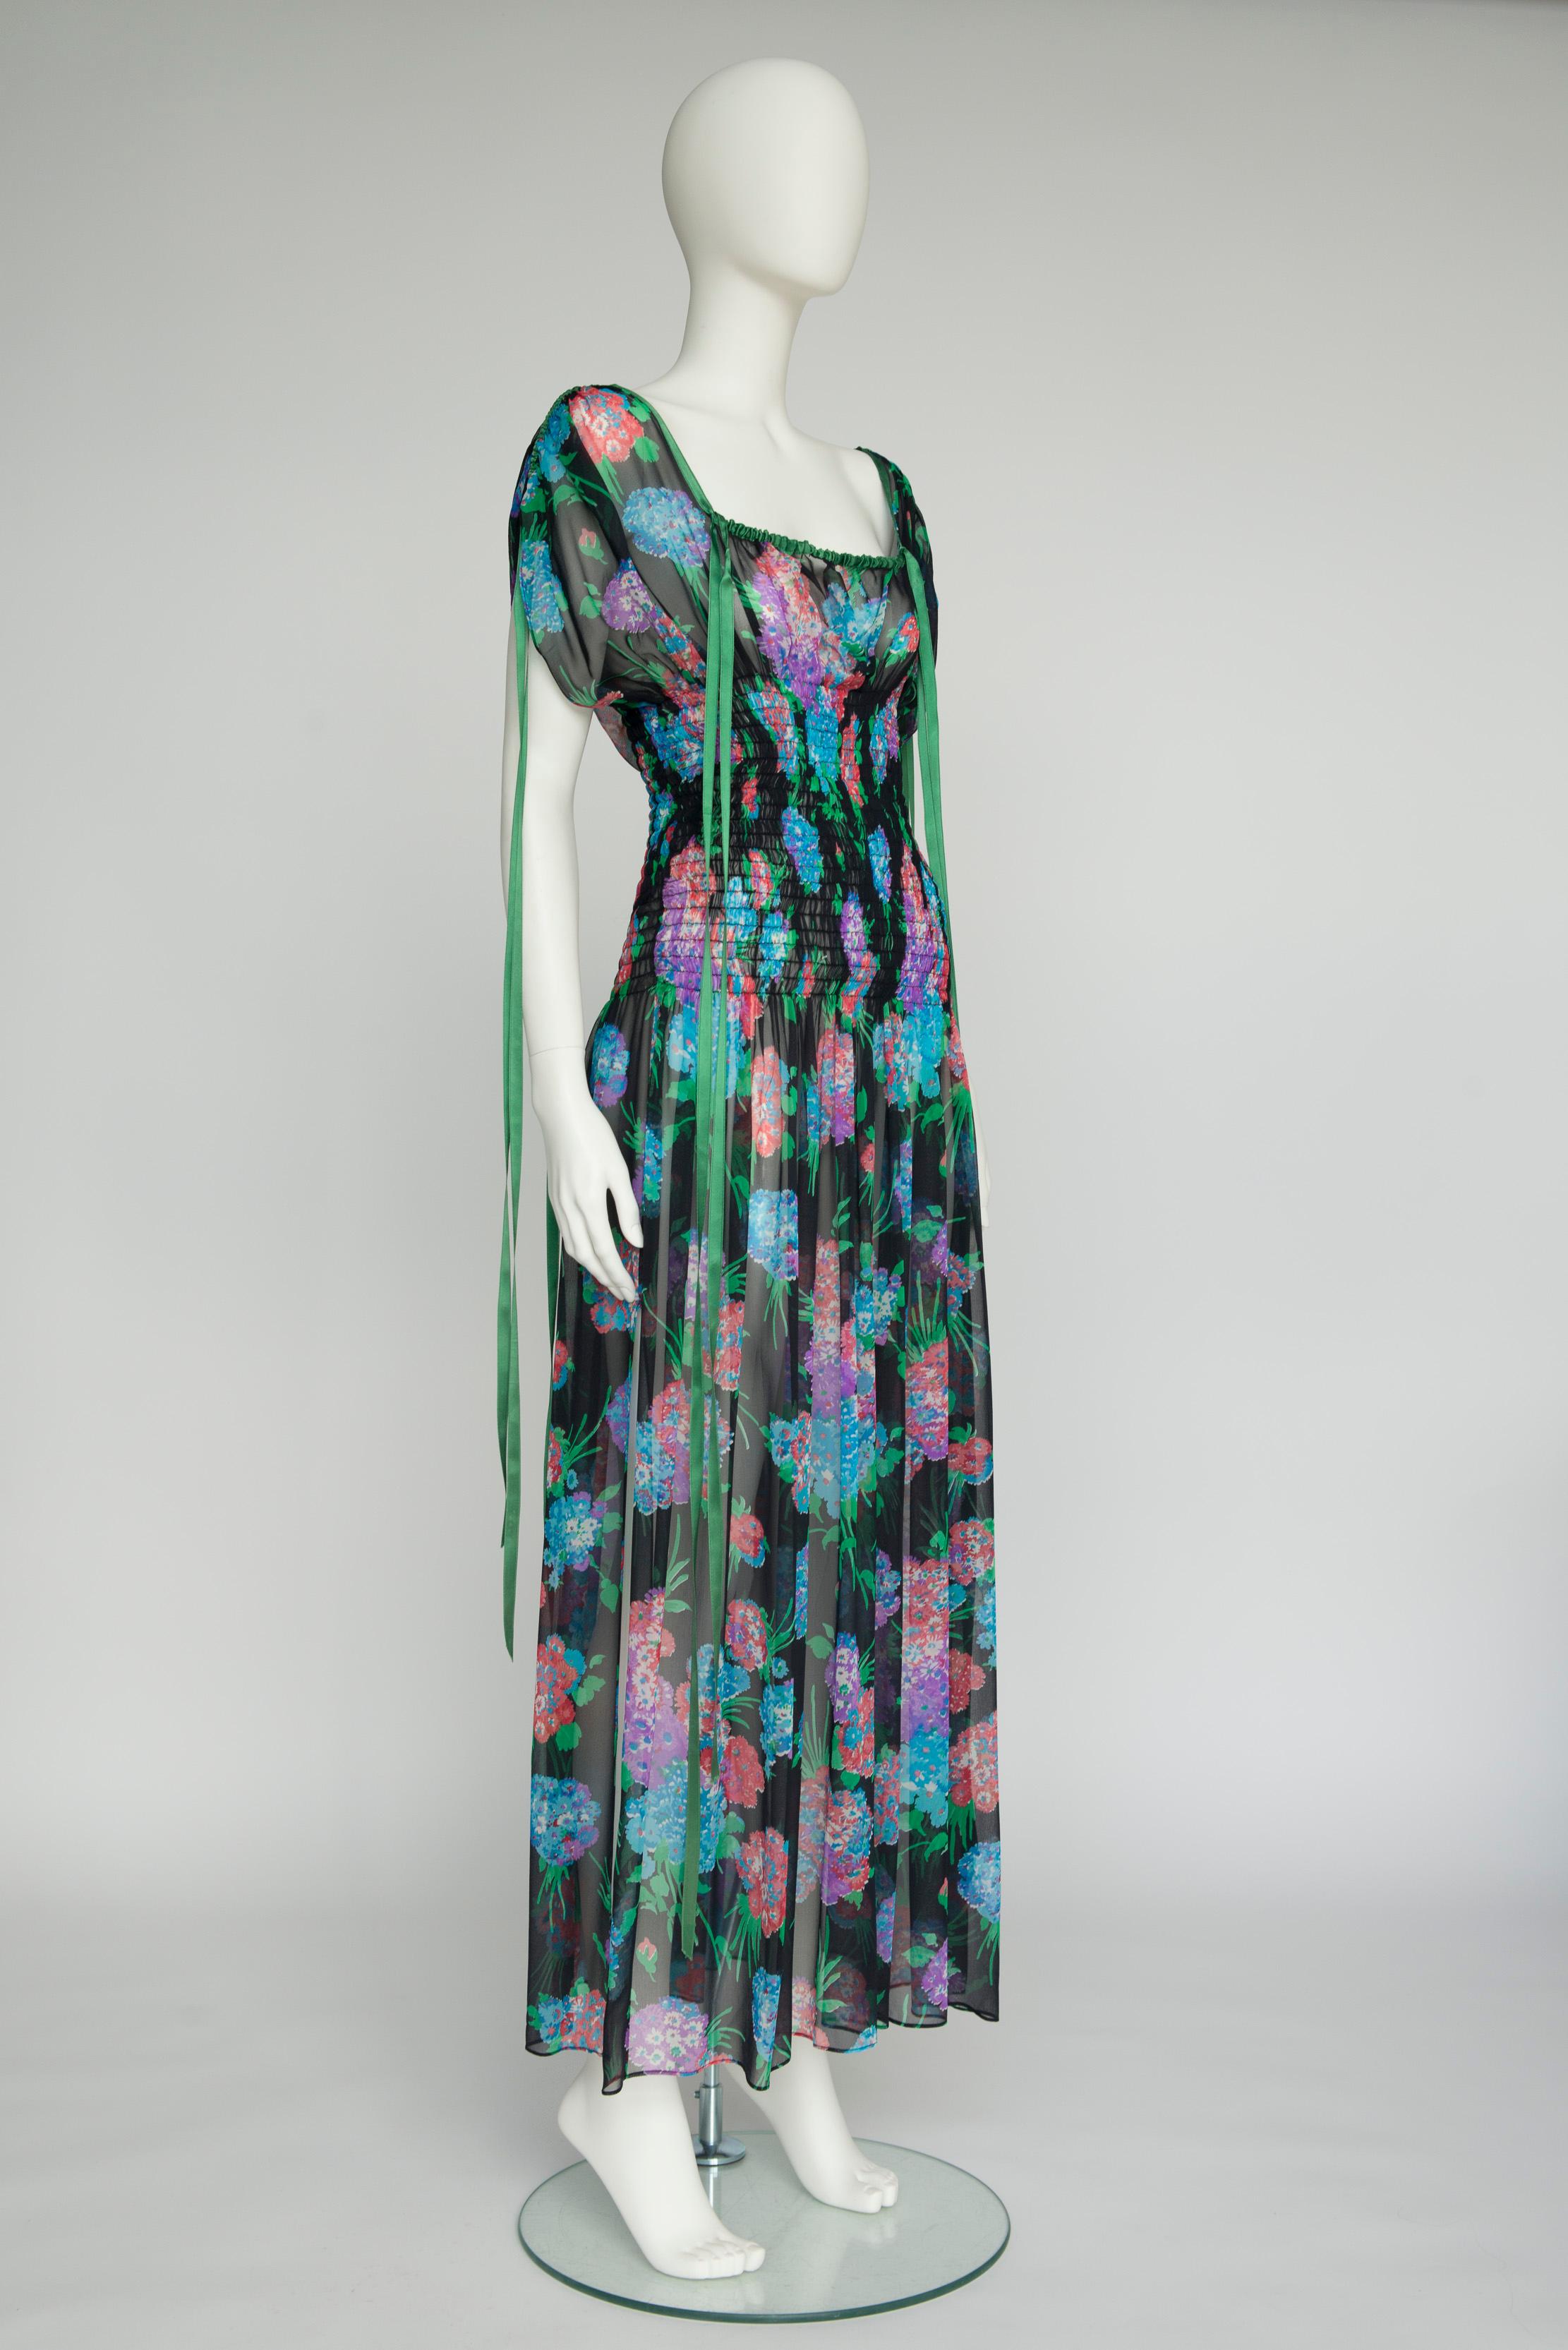 Cut from airy sheer silk chiffon, this rare early 70s Saint Laurent Rive Gauche maxi dress is shirred from under the chest to the hips for a flattering - though comfortable - closer fit. Around the neckline and on the sleeves, adjustable green silk